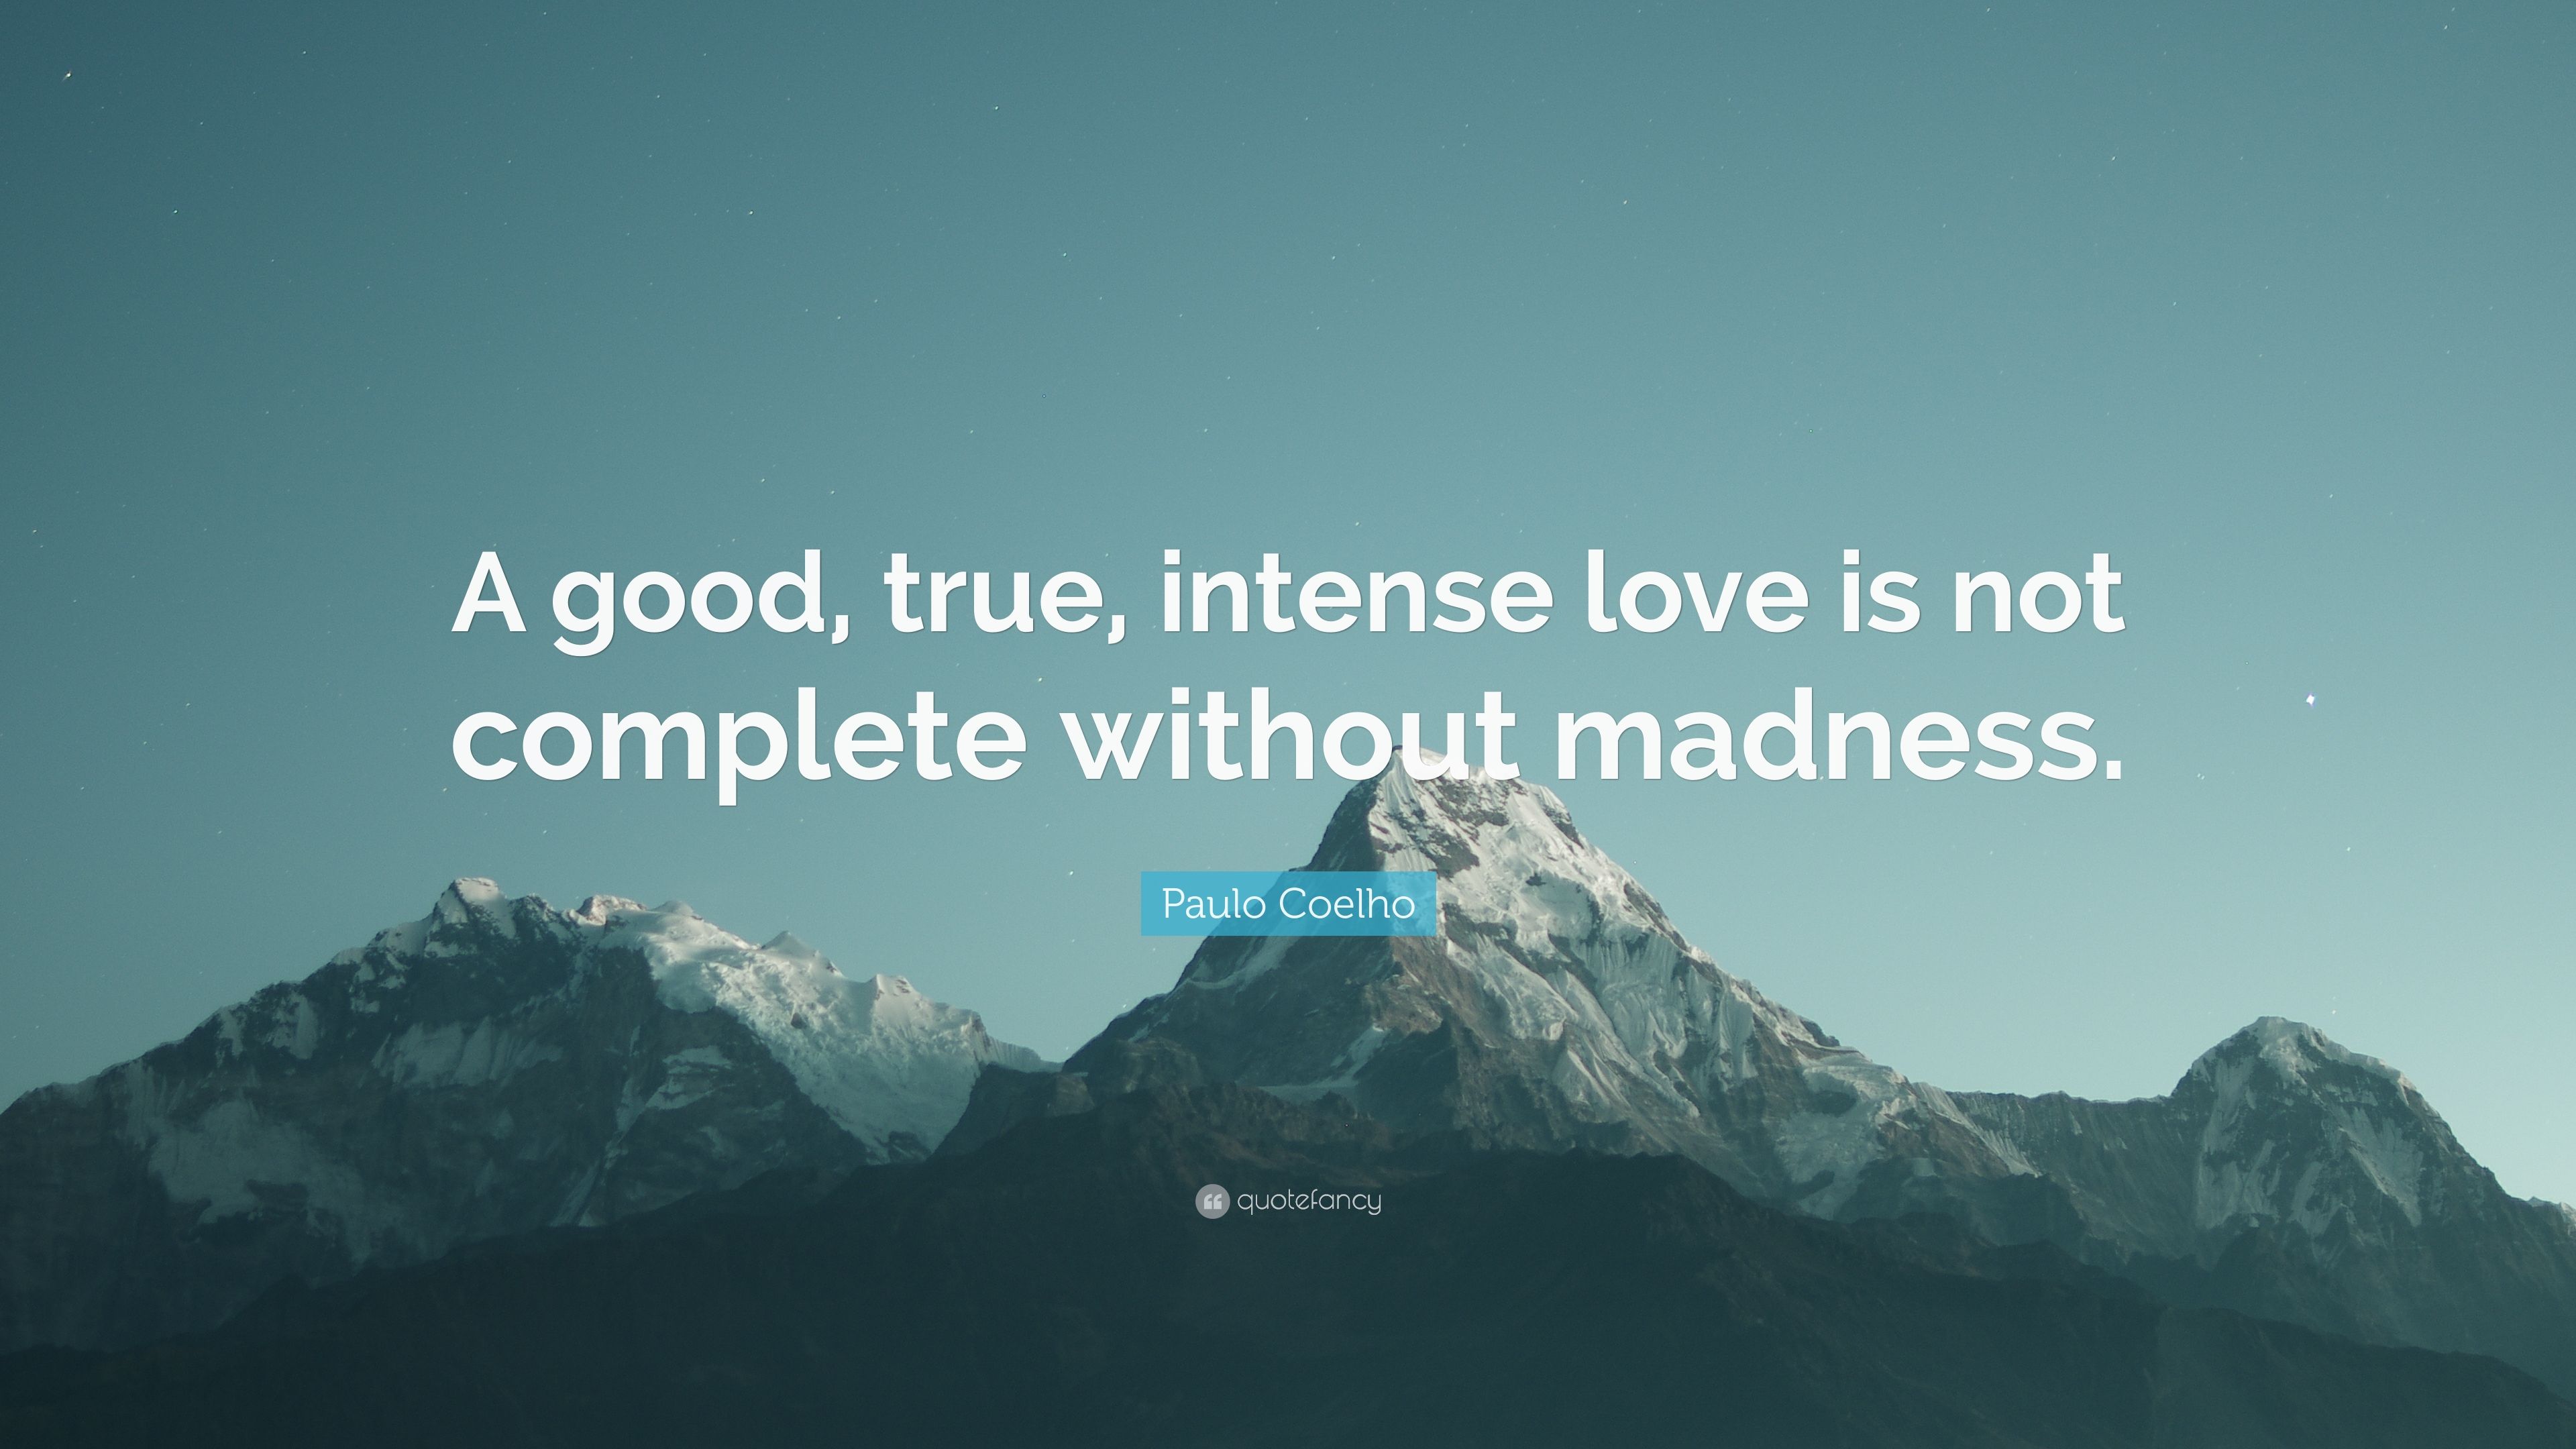 Paulo Coelho Quote: “A good, true, intense love is not complete